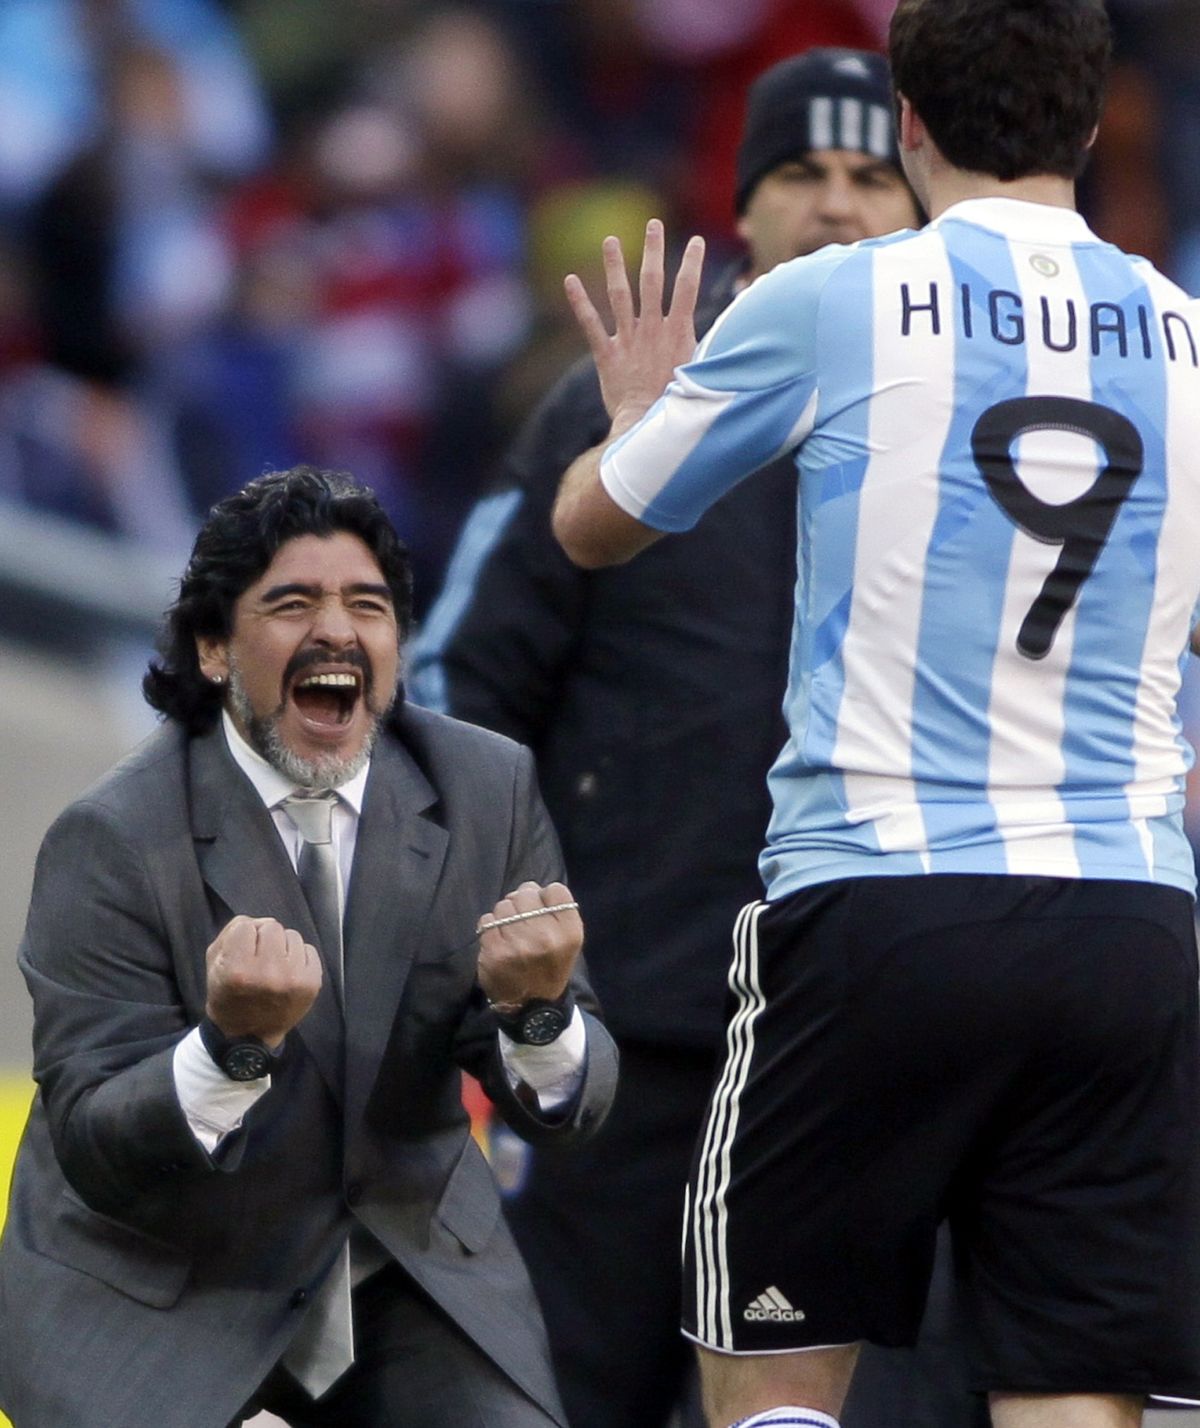 Argentina head coach Diego Maradona, left, congratulates Gonzalo Higuain during the World Cup group B soccer match between Argentina and South Korea at Soccer City in Johannesburg, South Africa. Argentina won 4-1. (Ivan Sekretarev / Associated Press)